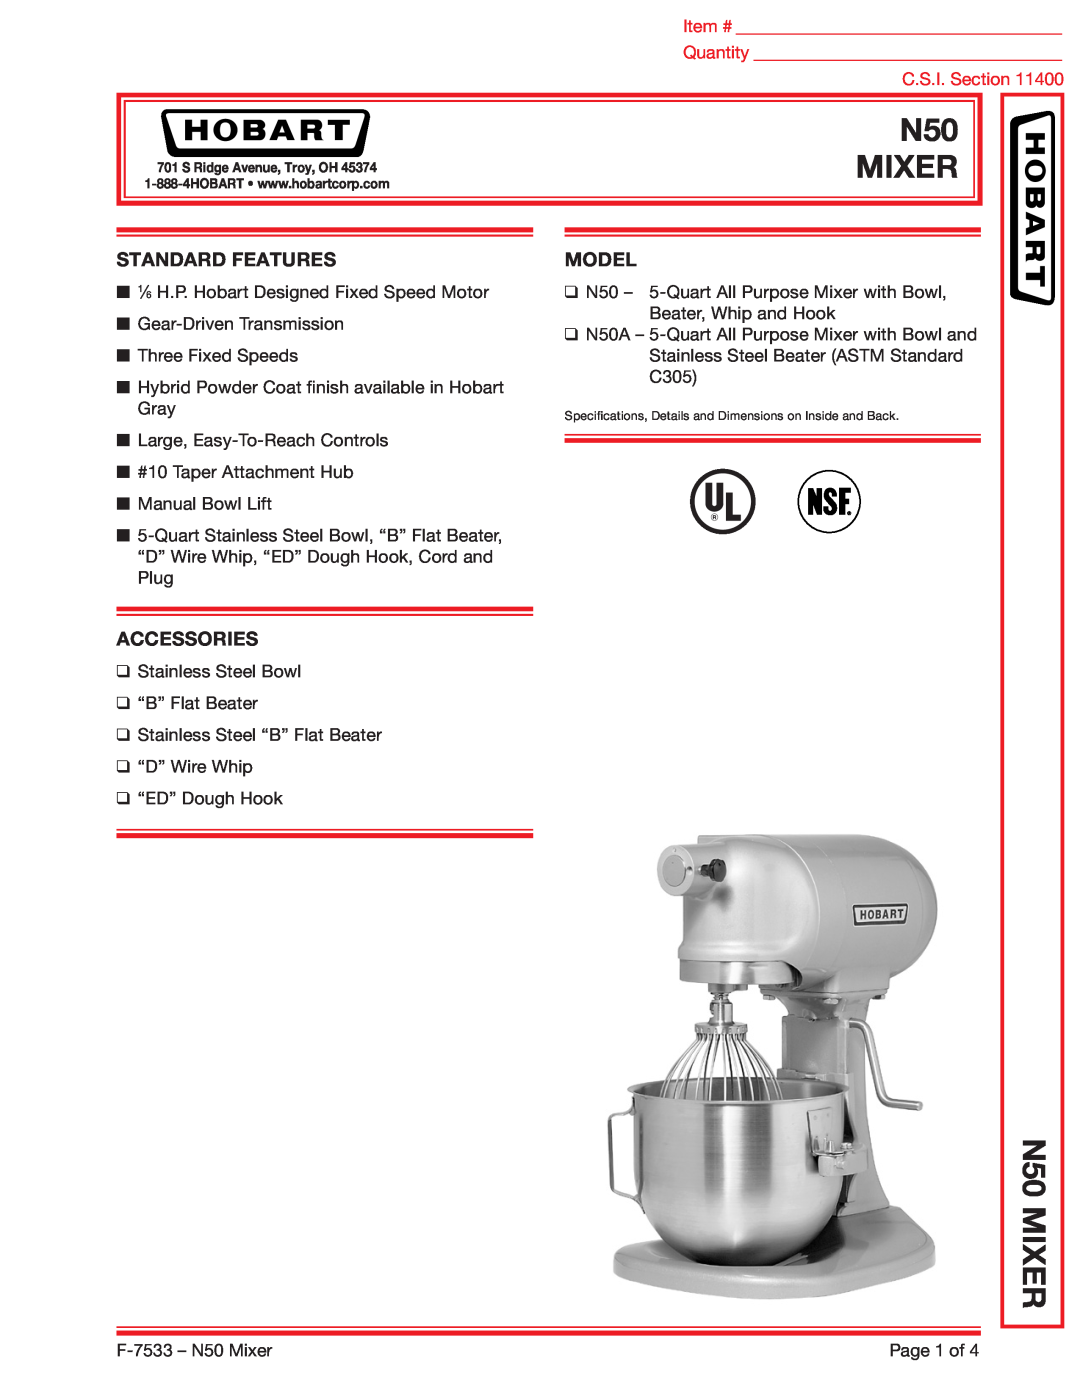 Hobart N50A dimensions Mixer, N50 MIXER, Standard Features, Accessories, Model, C.S.I. Section 